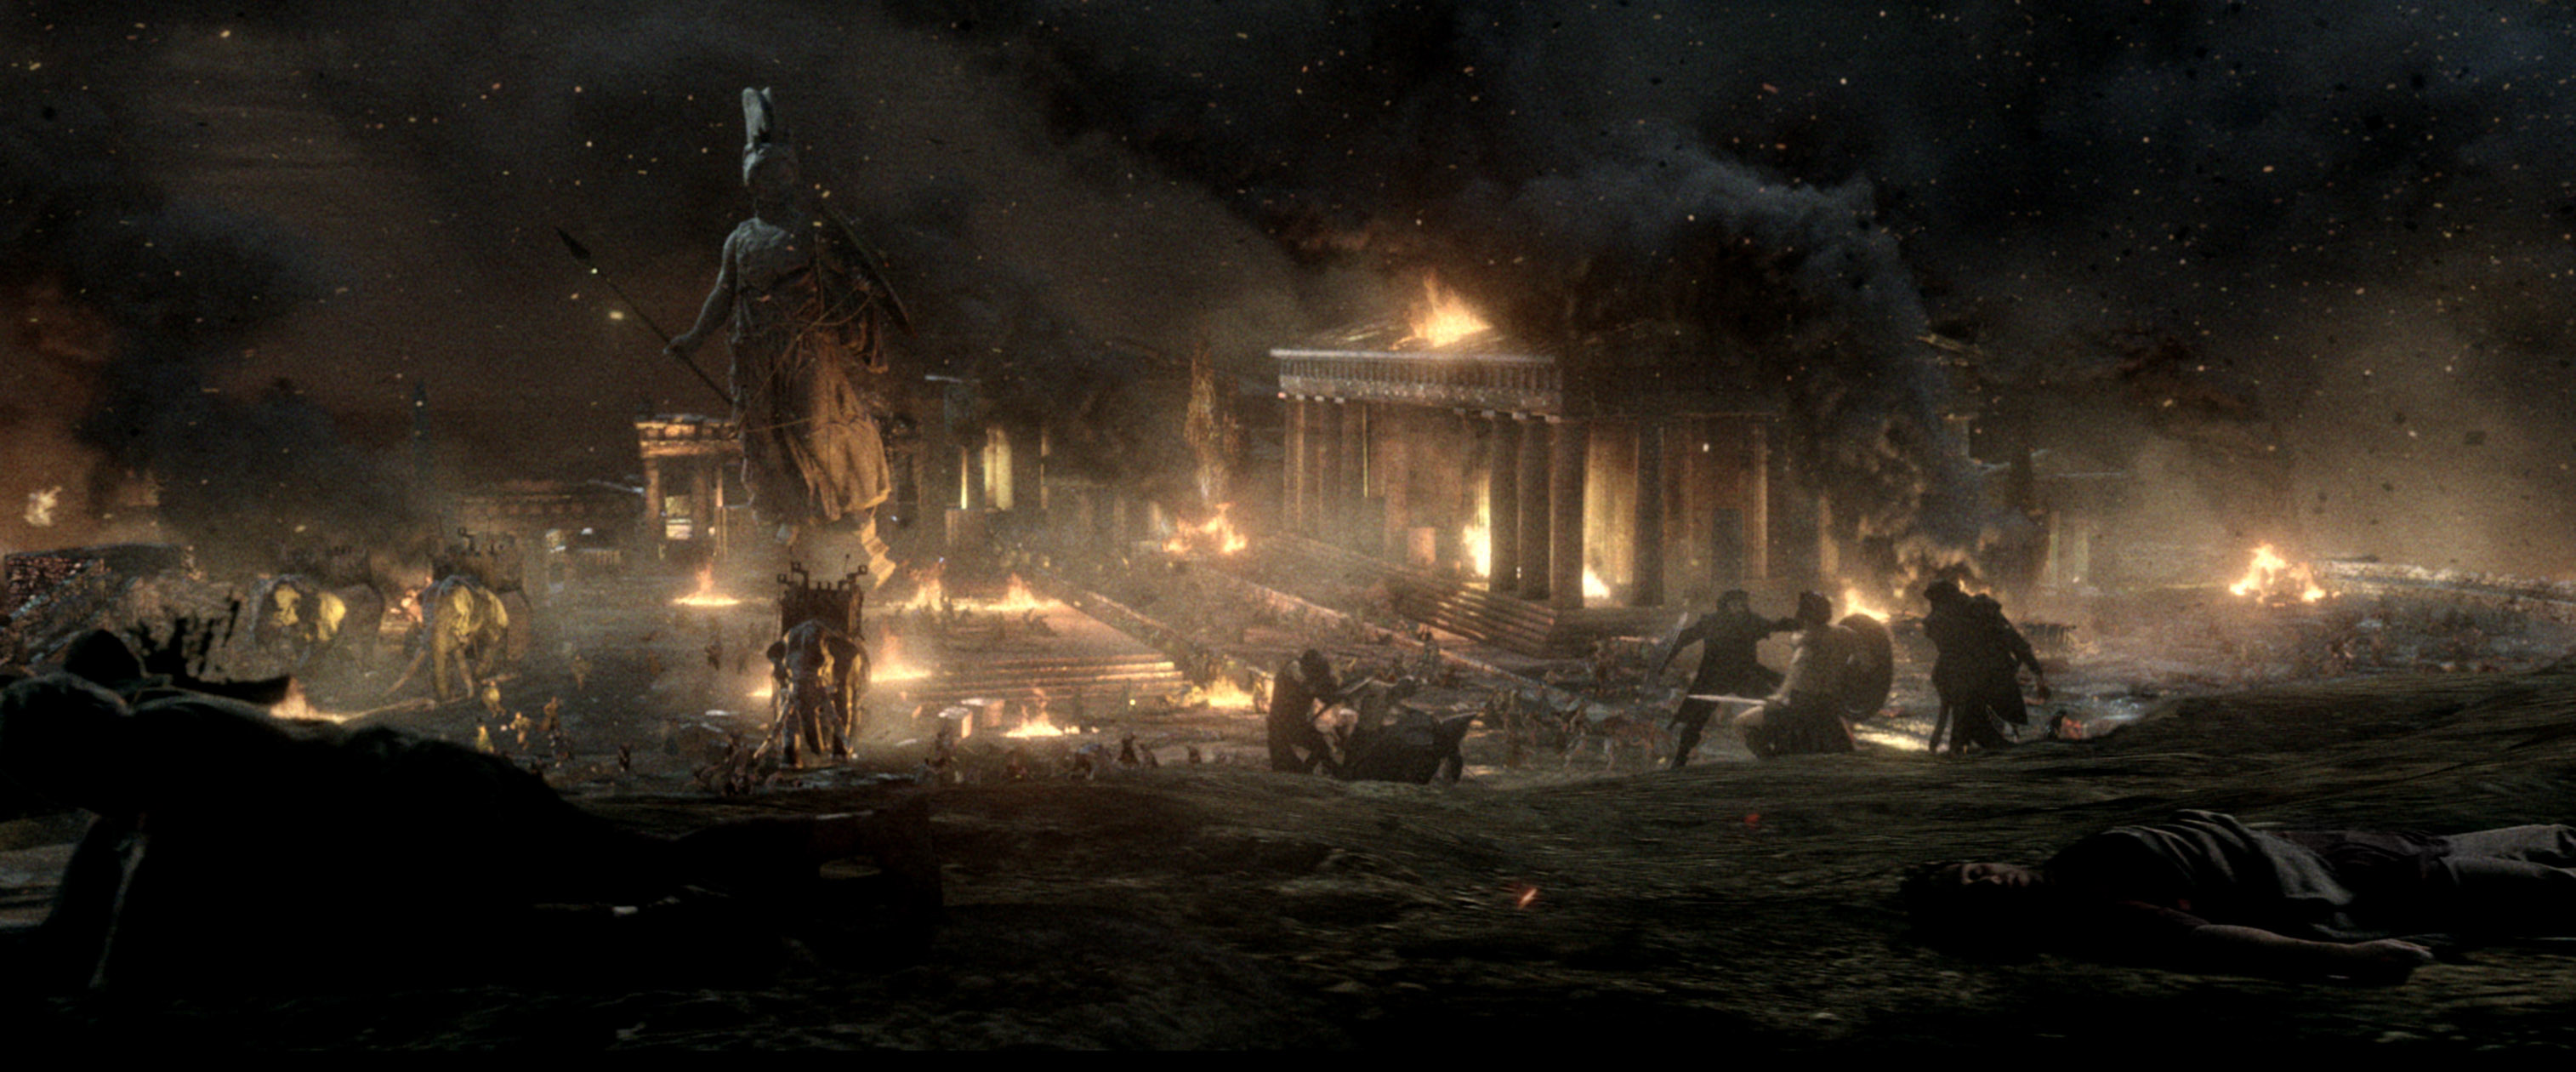 300: Rise of an Empire Photo Gallery